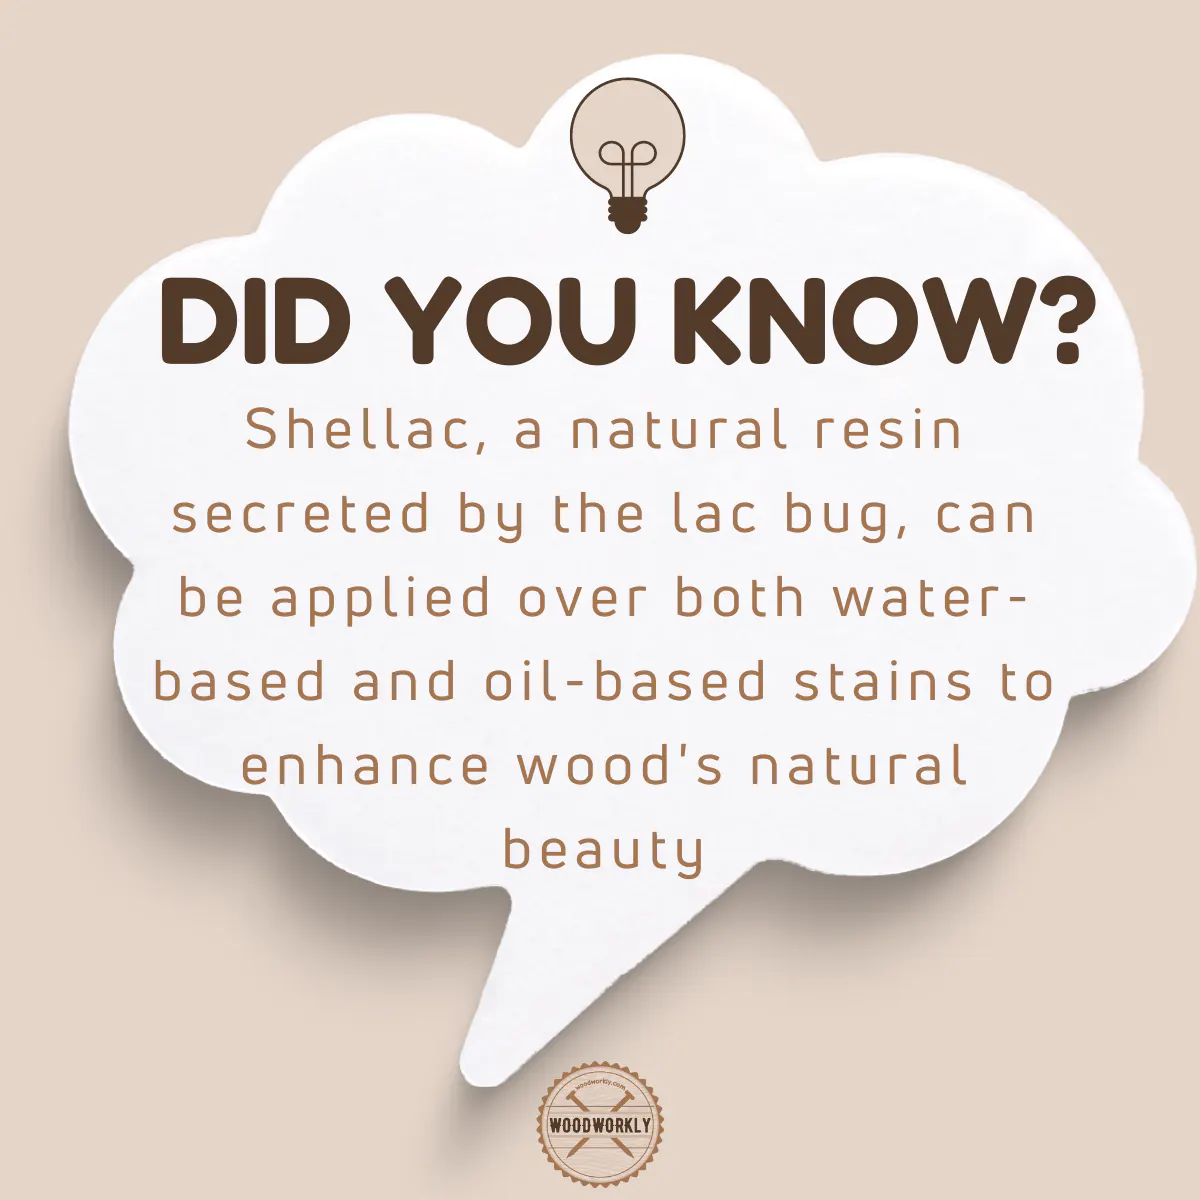 Did you know fact about applying shellac over stain